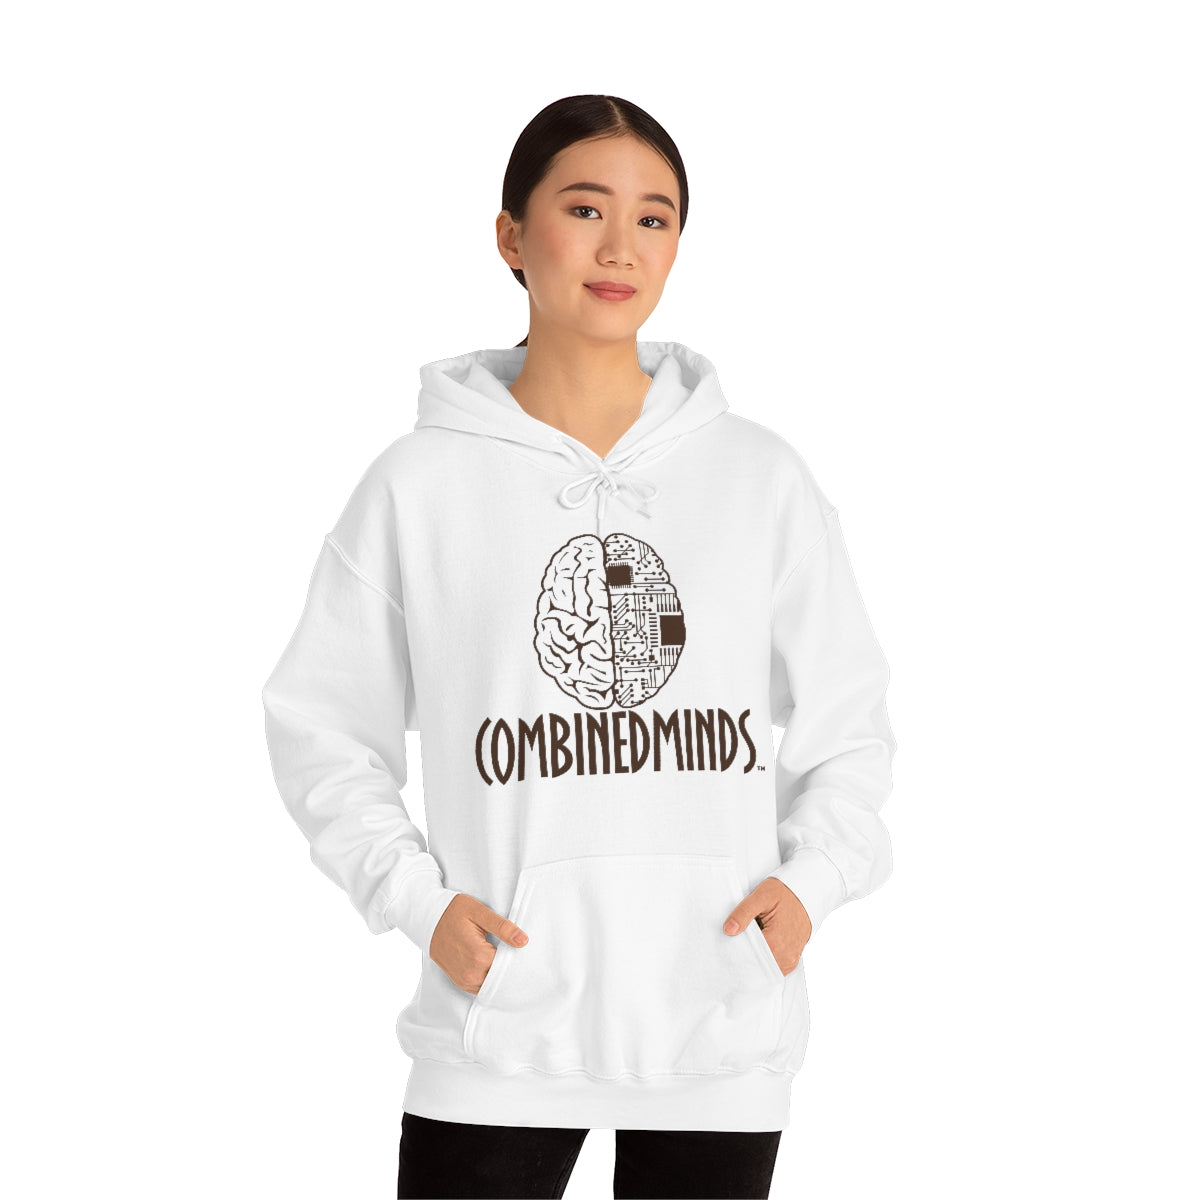 CombinedMinds Unisex Heavy Blend™ Hooded Sweatshirt - Chocolate Collection